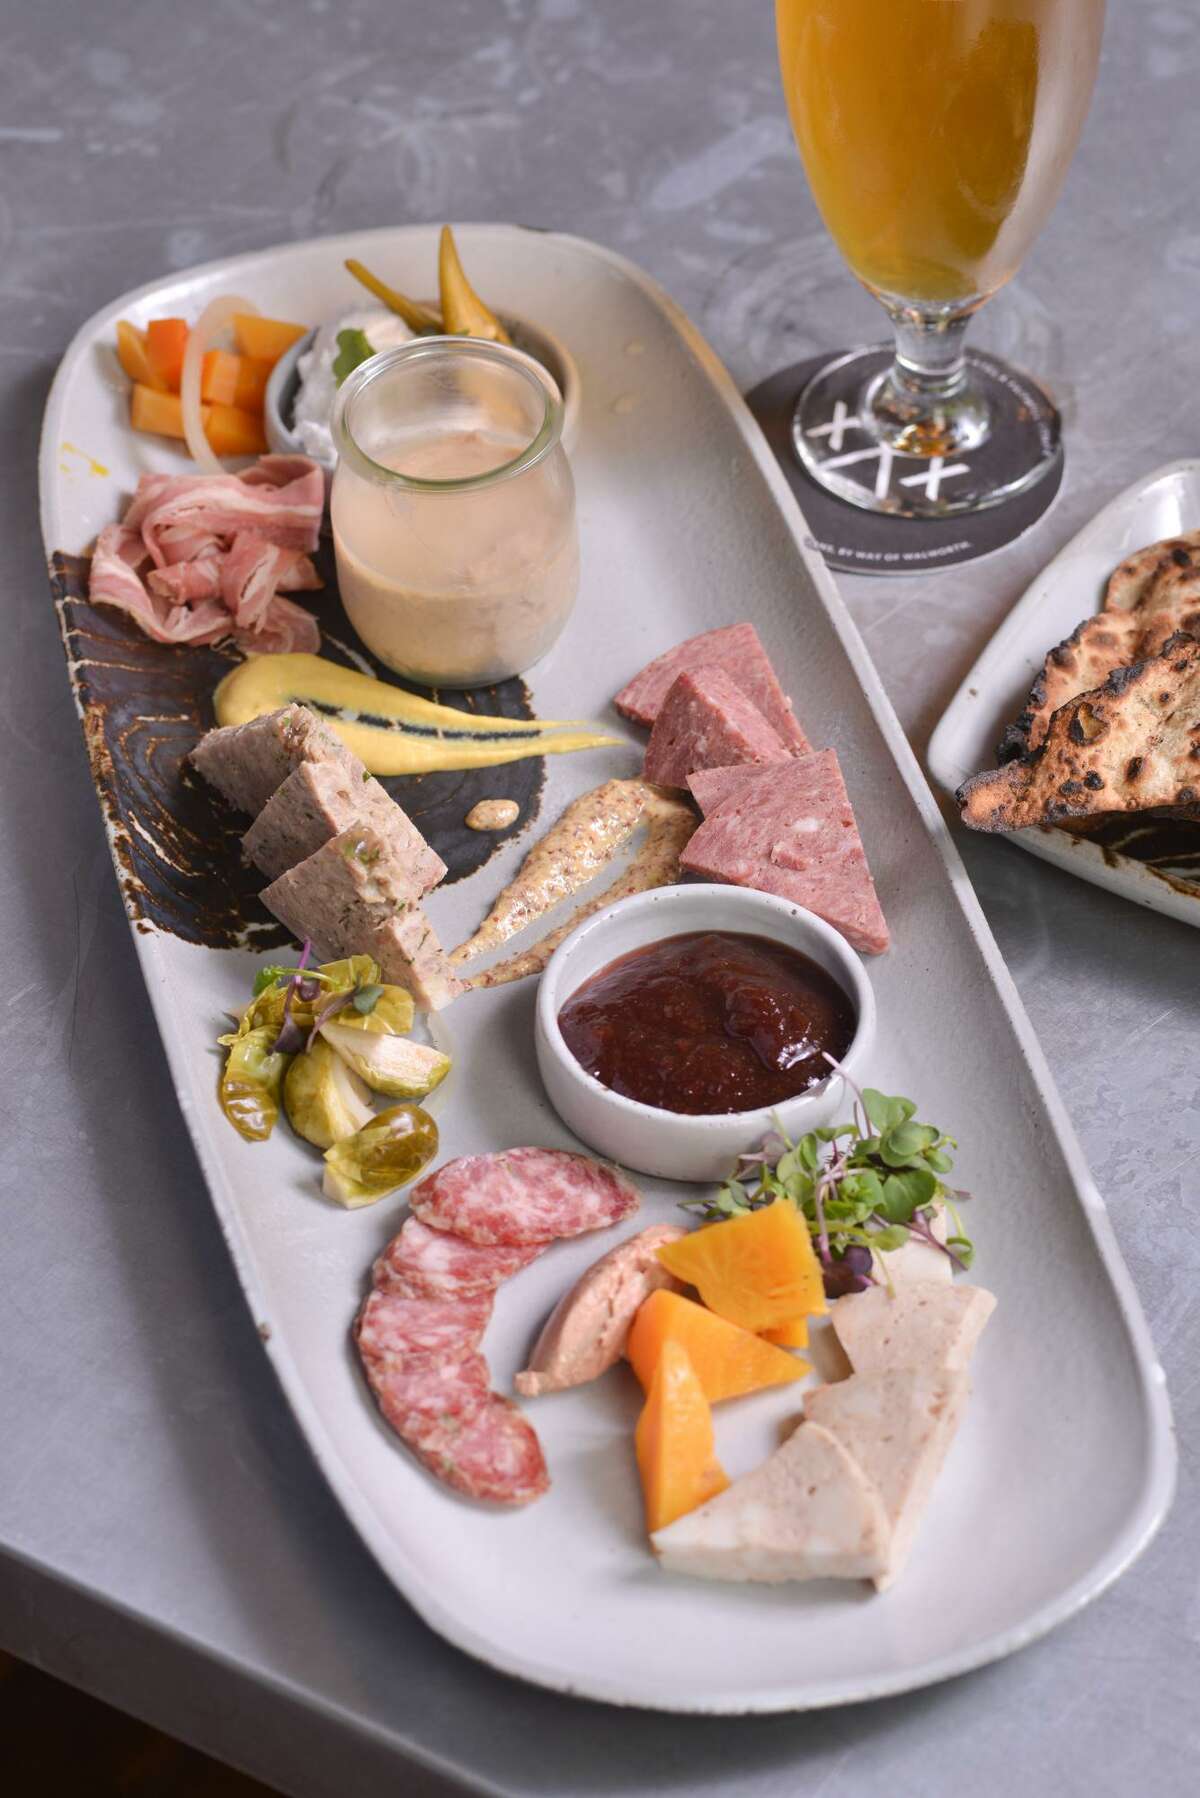 A charcuterie plate from Cured featuring mortadella, chicken liver mousse, jalapeño sauce, apple red wine jam, pickled Brussels sprouts, country style pork paté, smoked veal wurst, smoked lamb belly and whipped pork butter and beer flatbread.